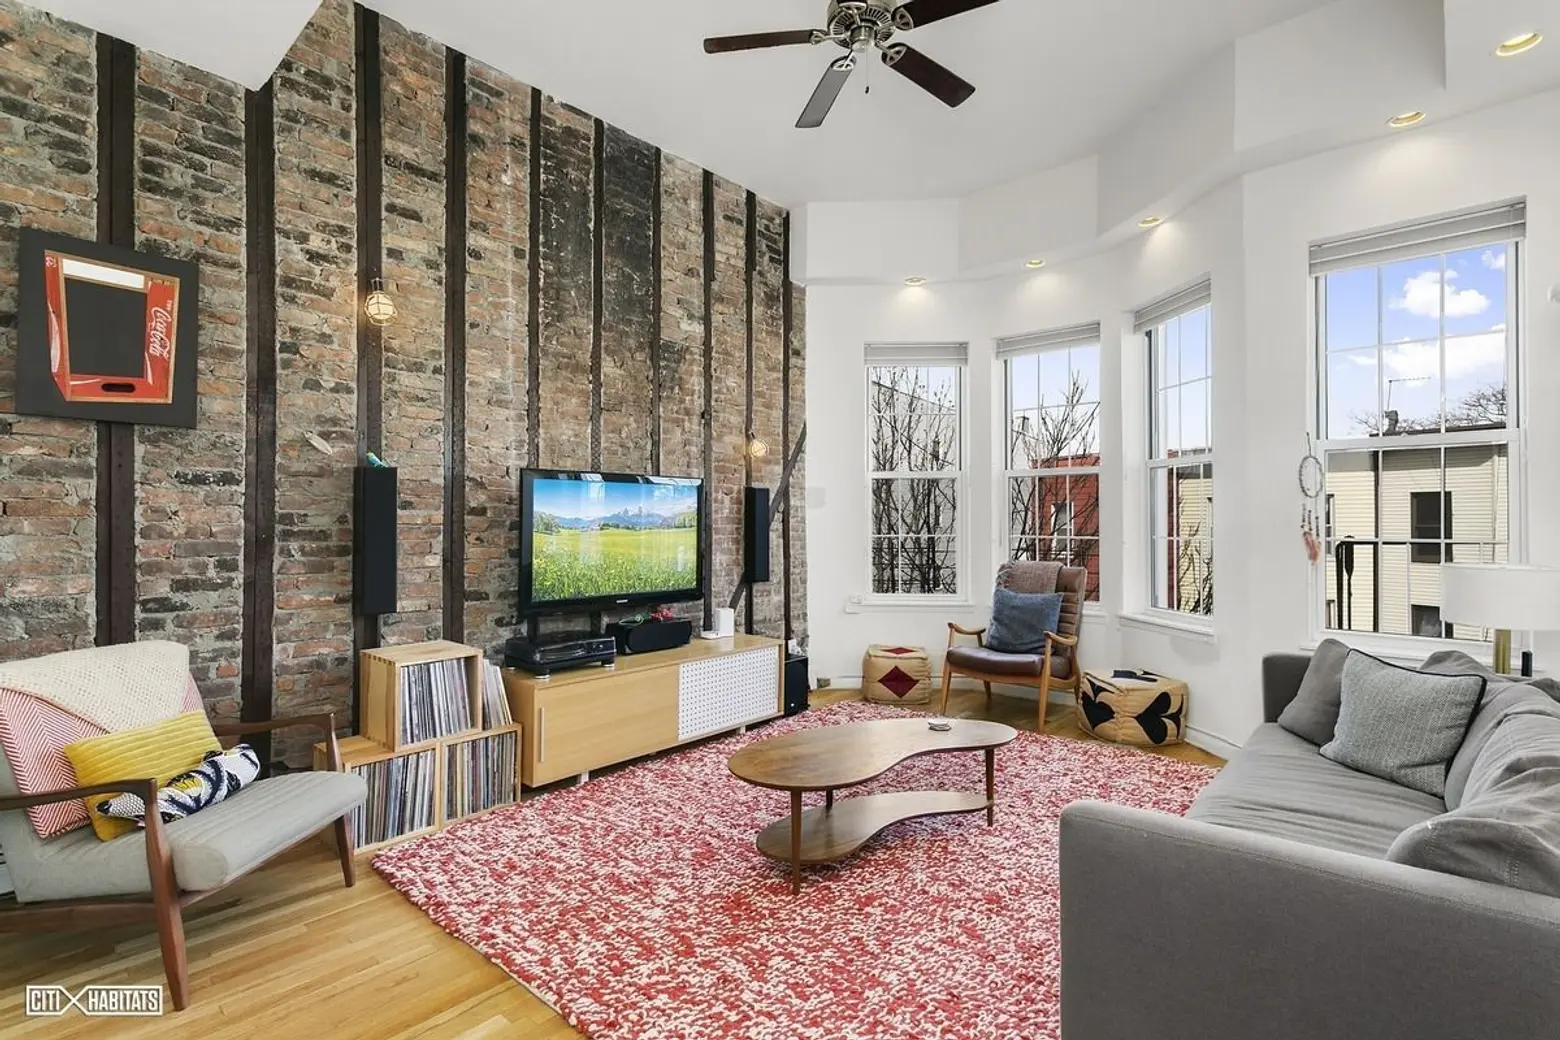 Old and new meet at this $1.4M Greenpoint duplex with brick feature wall and glass-enclosed staircase